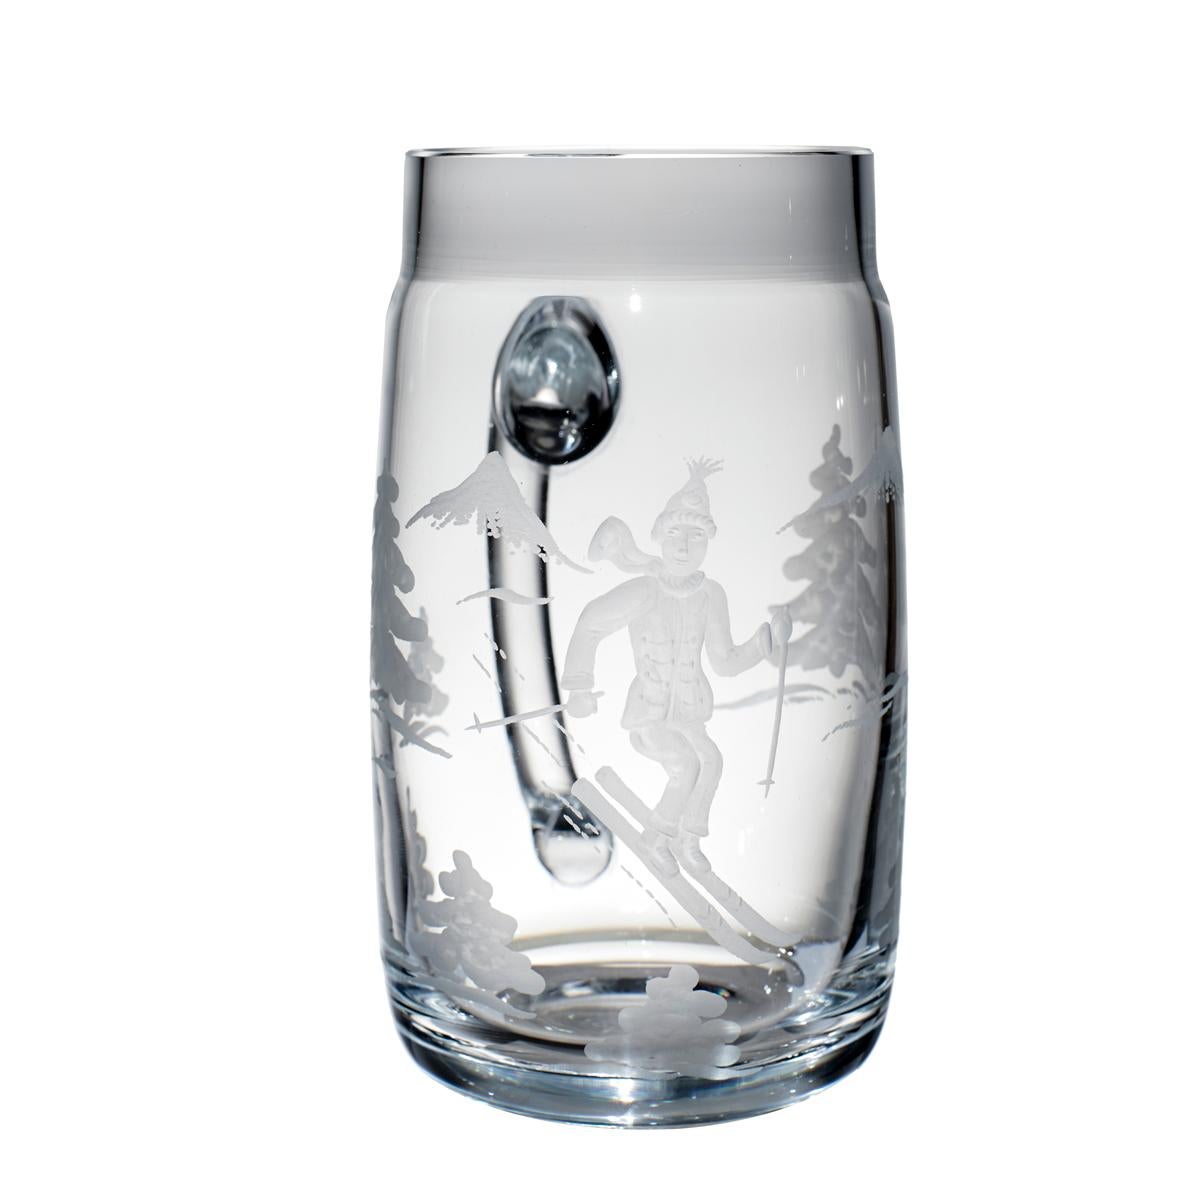 Beer glass called Bierseidl in clear crystal glass. Hand blown in Bavaria and hand-engraved with trees and a skier boy in the style of Black Forest. For 0.7 liter beer. Can be ordered per one or as a set with six.